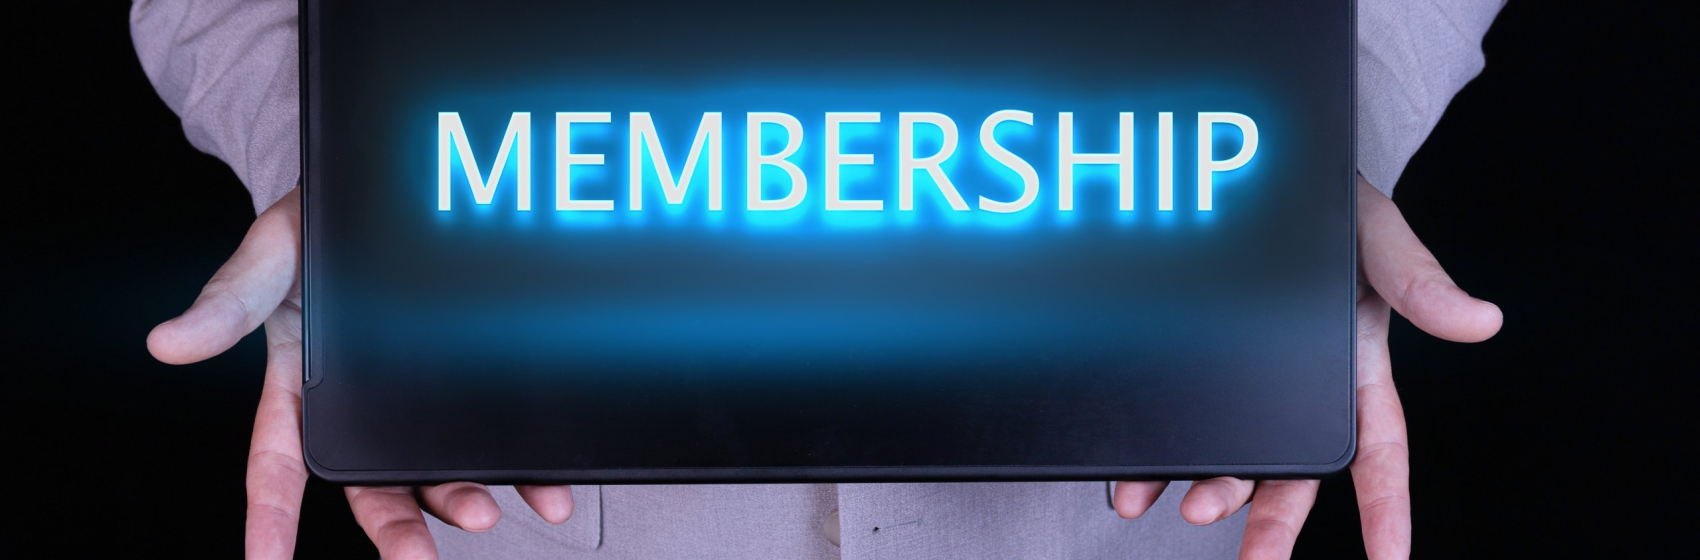 MEMBERSHIP word, text written in neon letters on a laptop which is being held by a businessman in a gray suit.